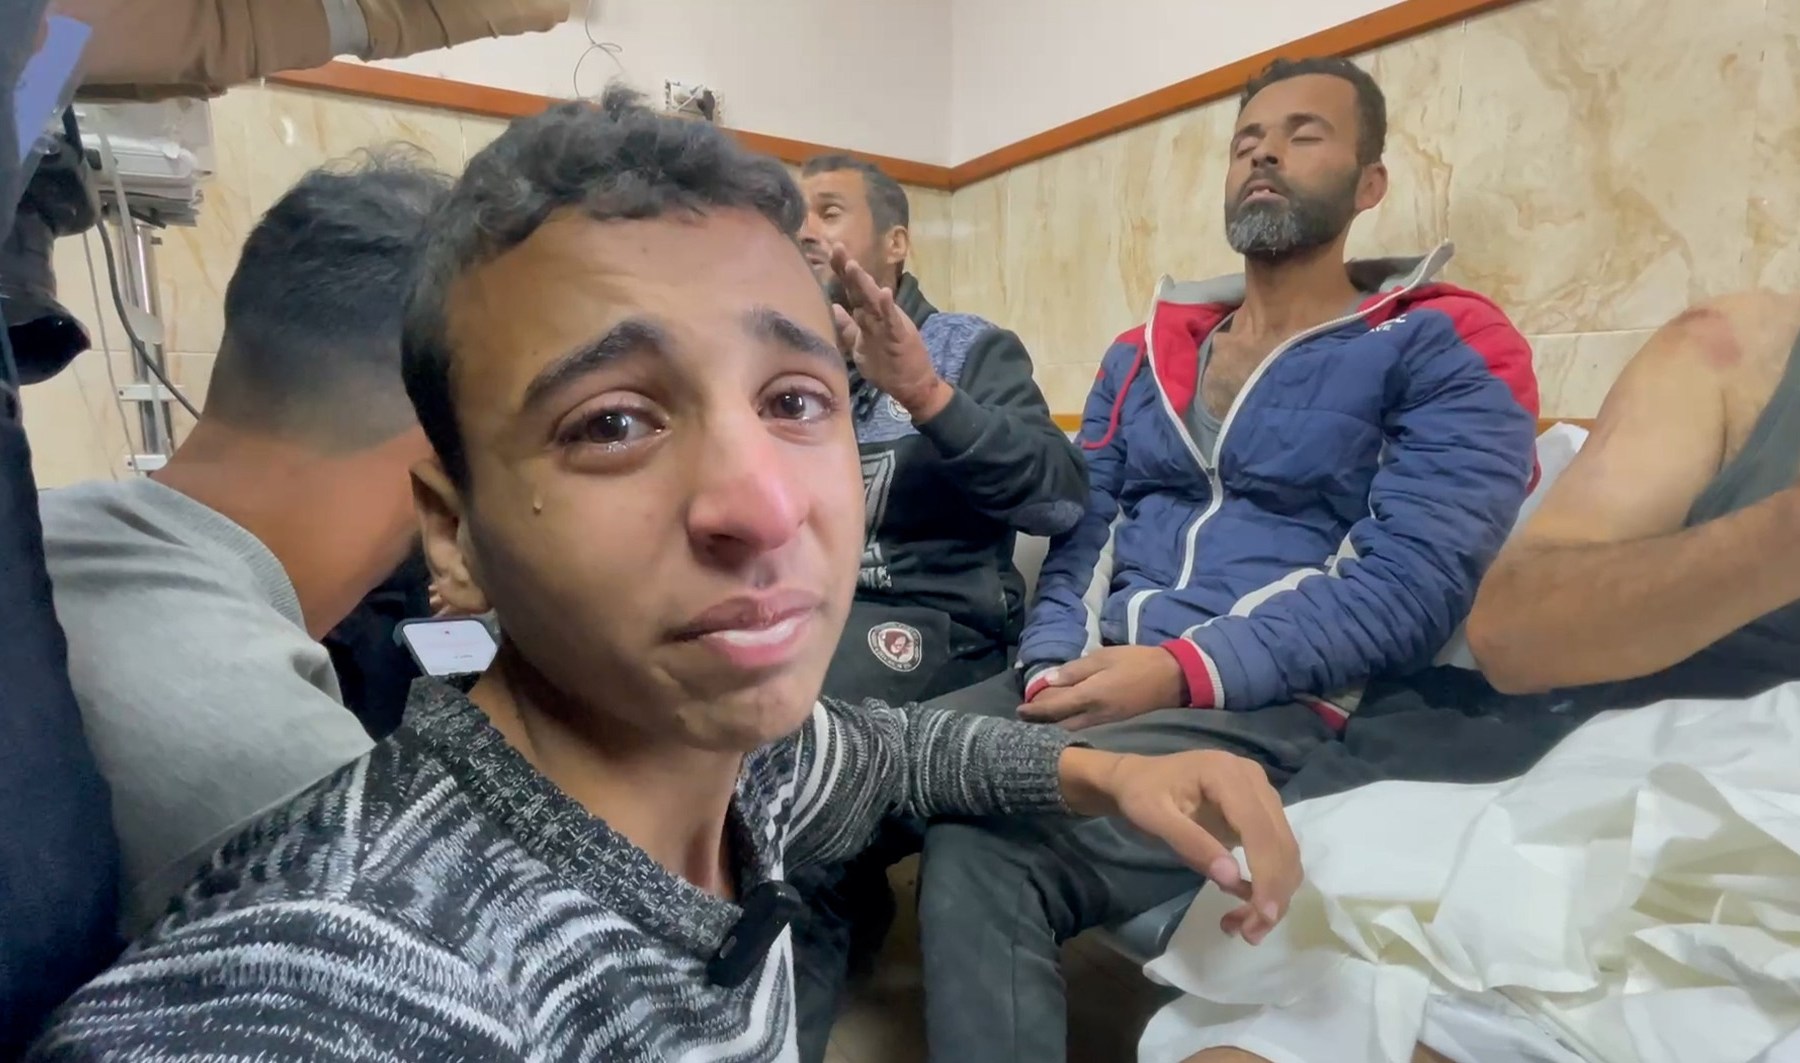 Palestinians speak of being stripped and abused by Israeli forces in Gaza | Israel-Palestine conflict